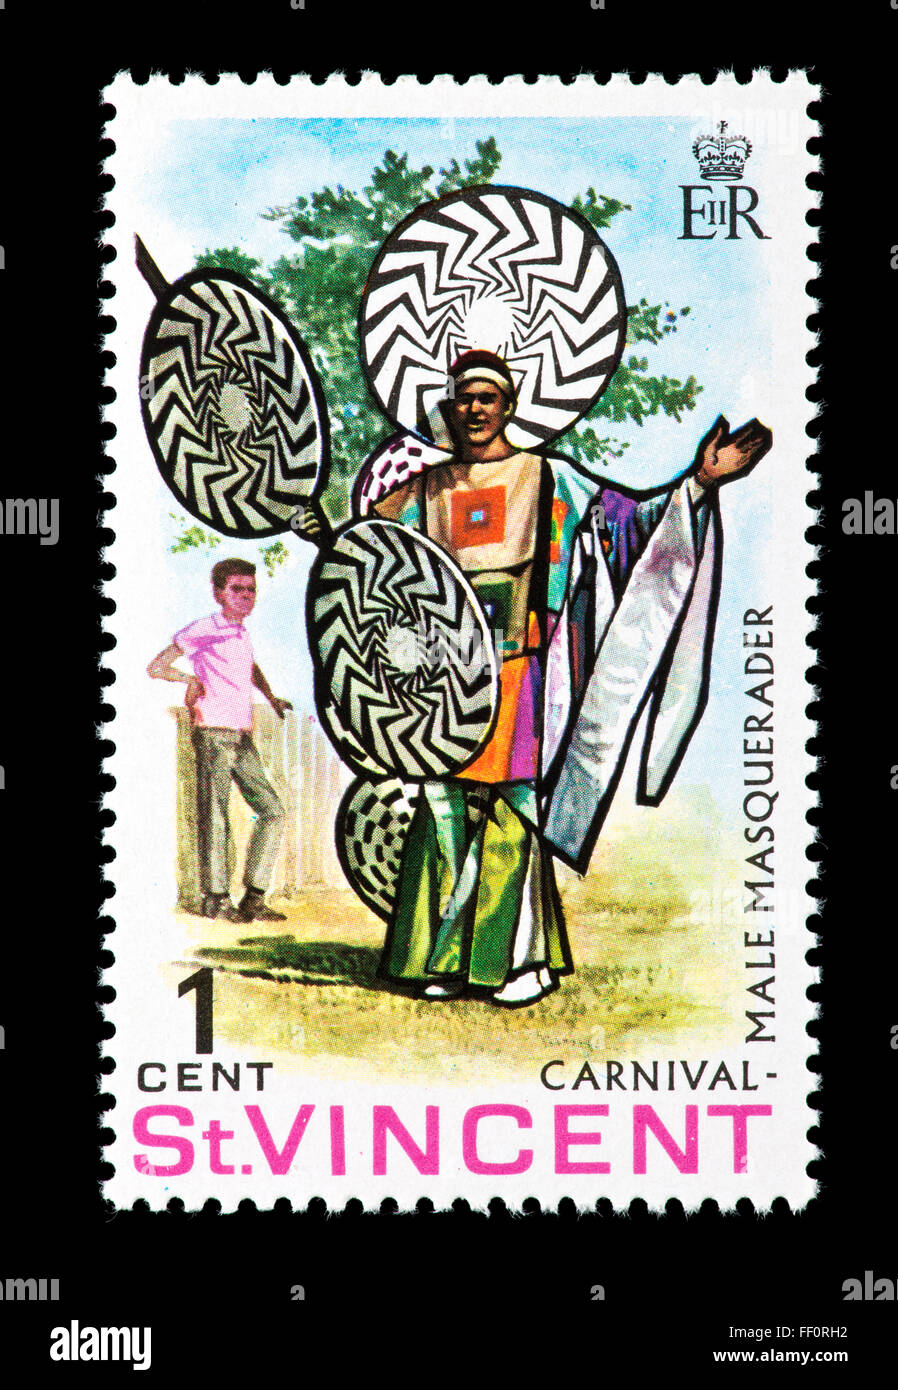 Postage stamp from St. Vincent depicting a male carnival masquerader Stock Photo